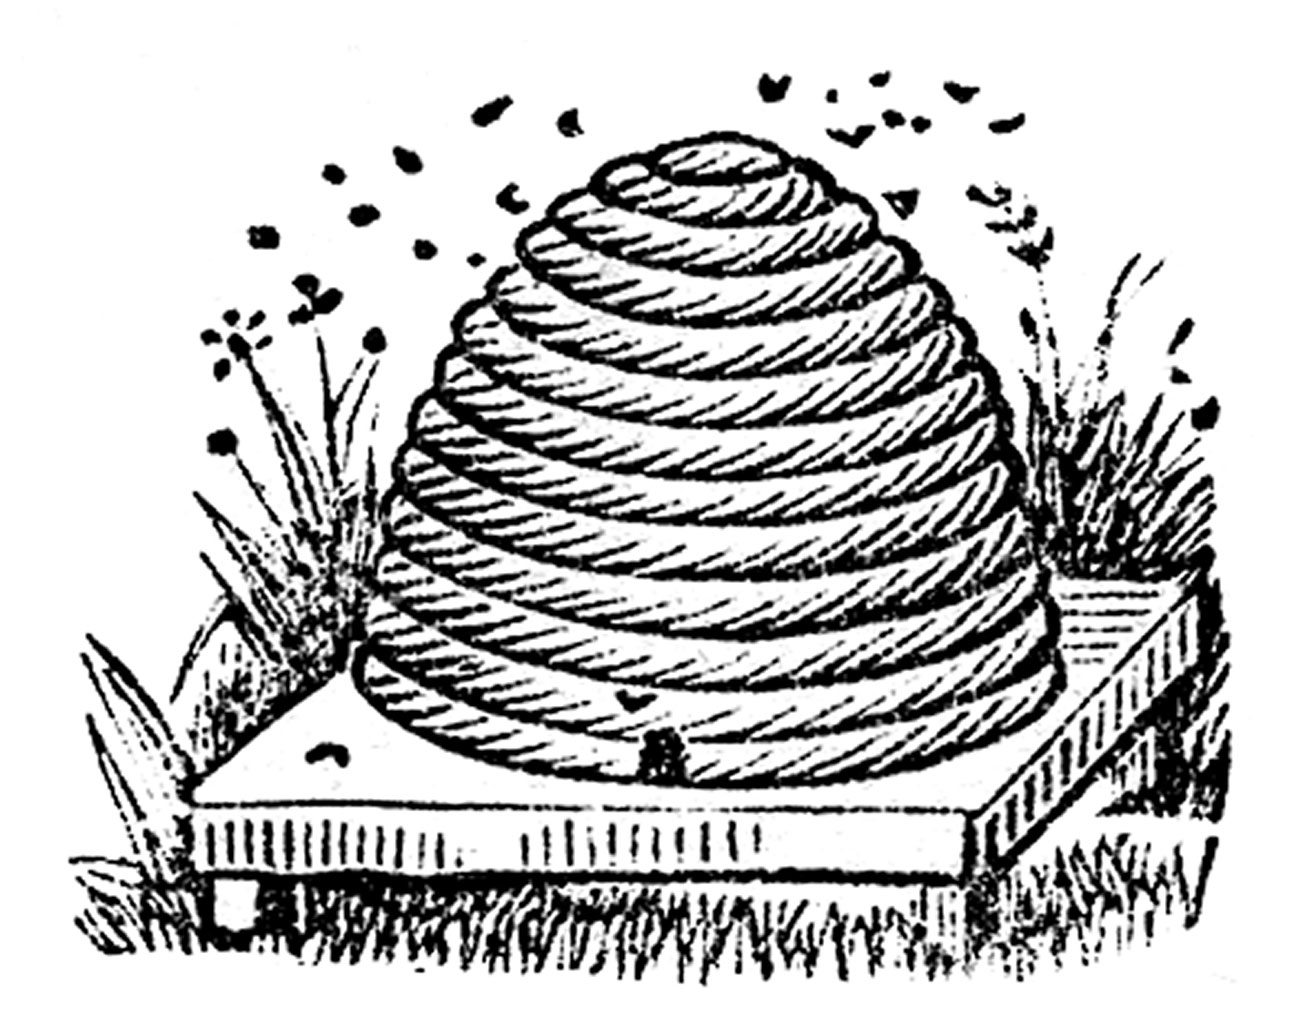 beehive clip art black and white